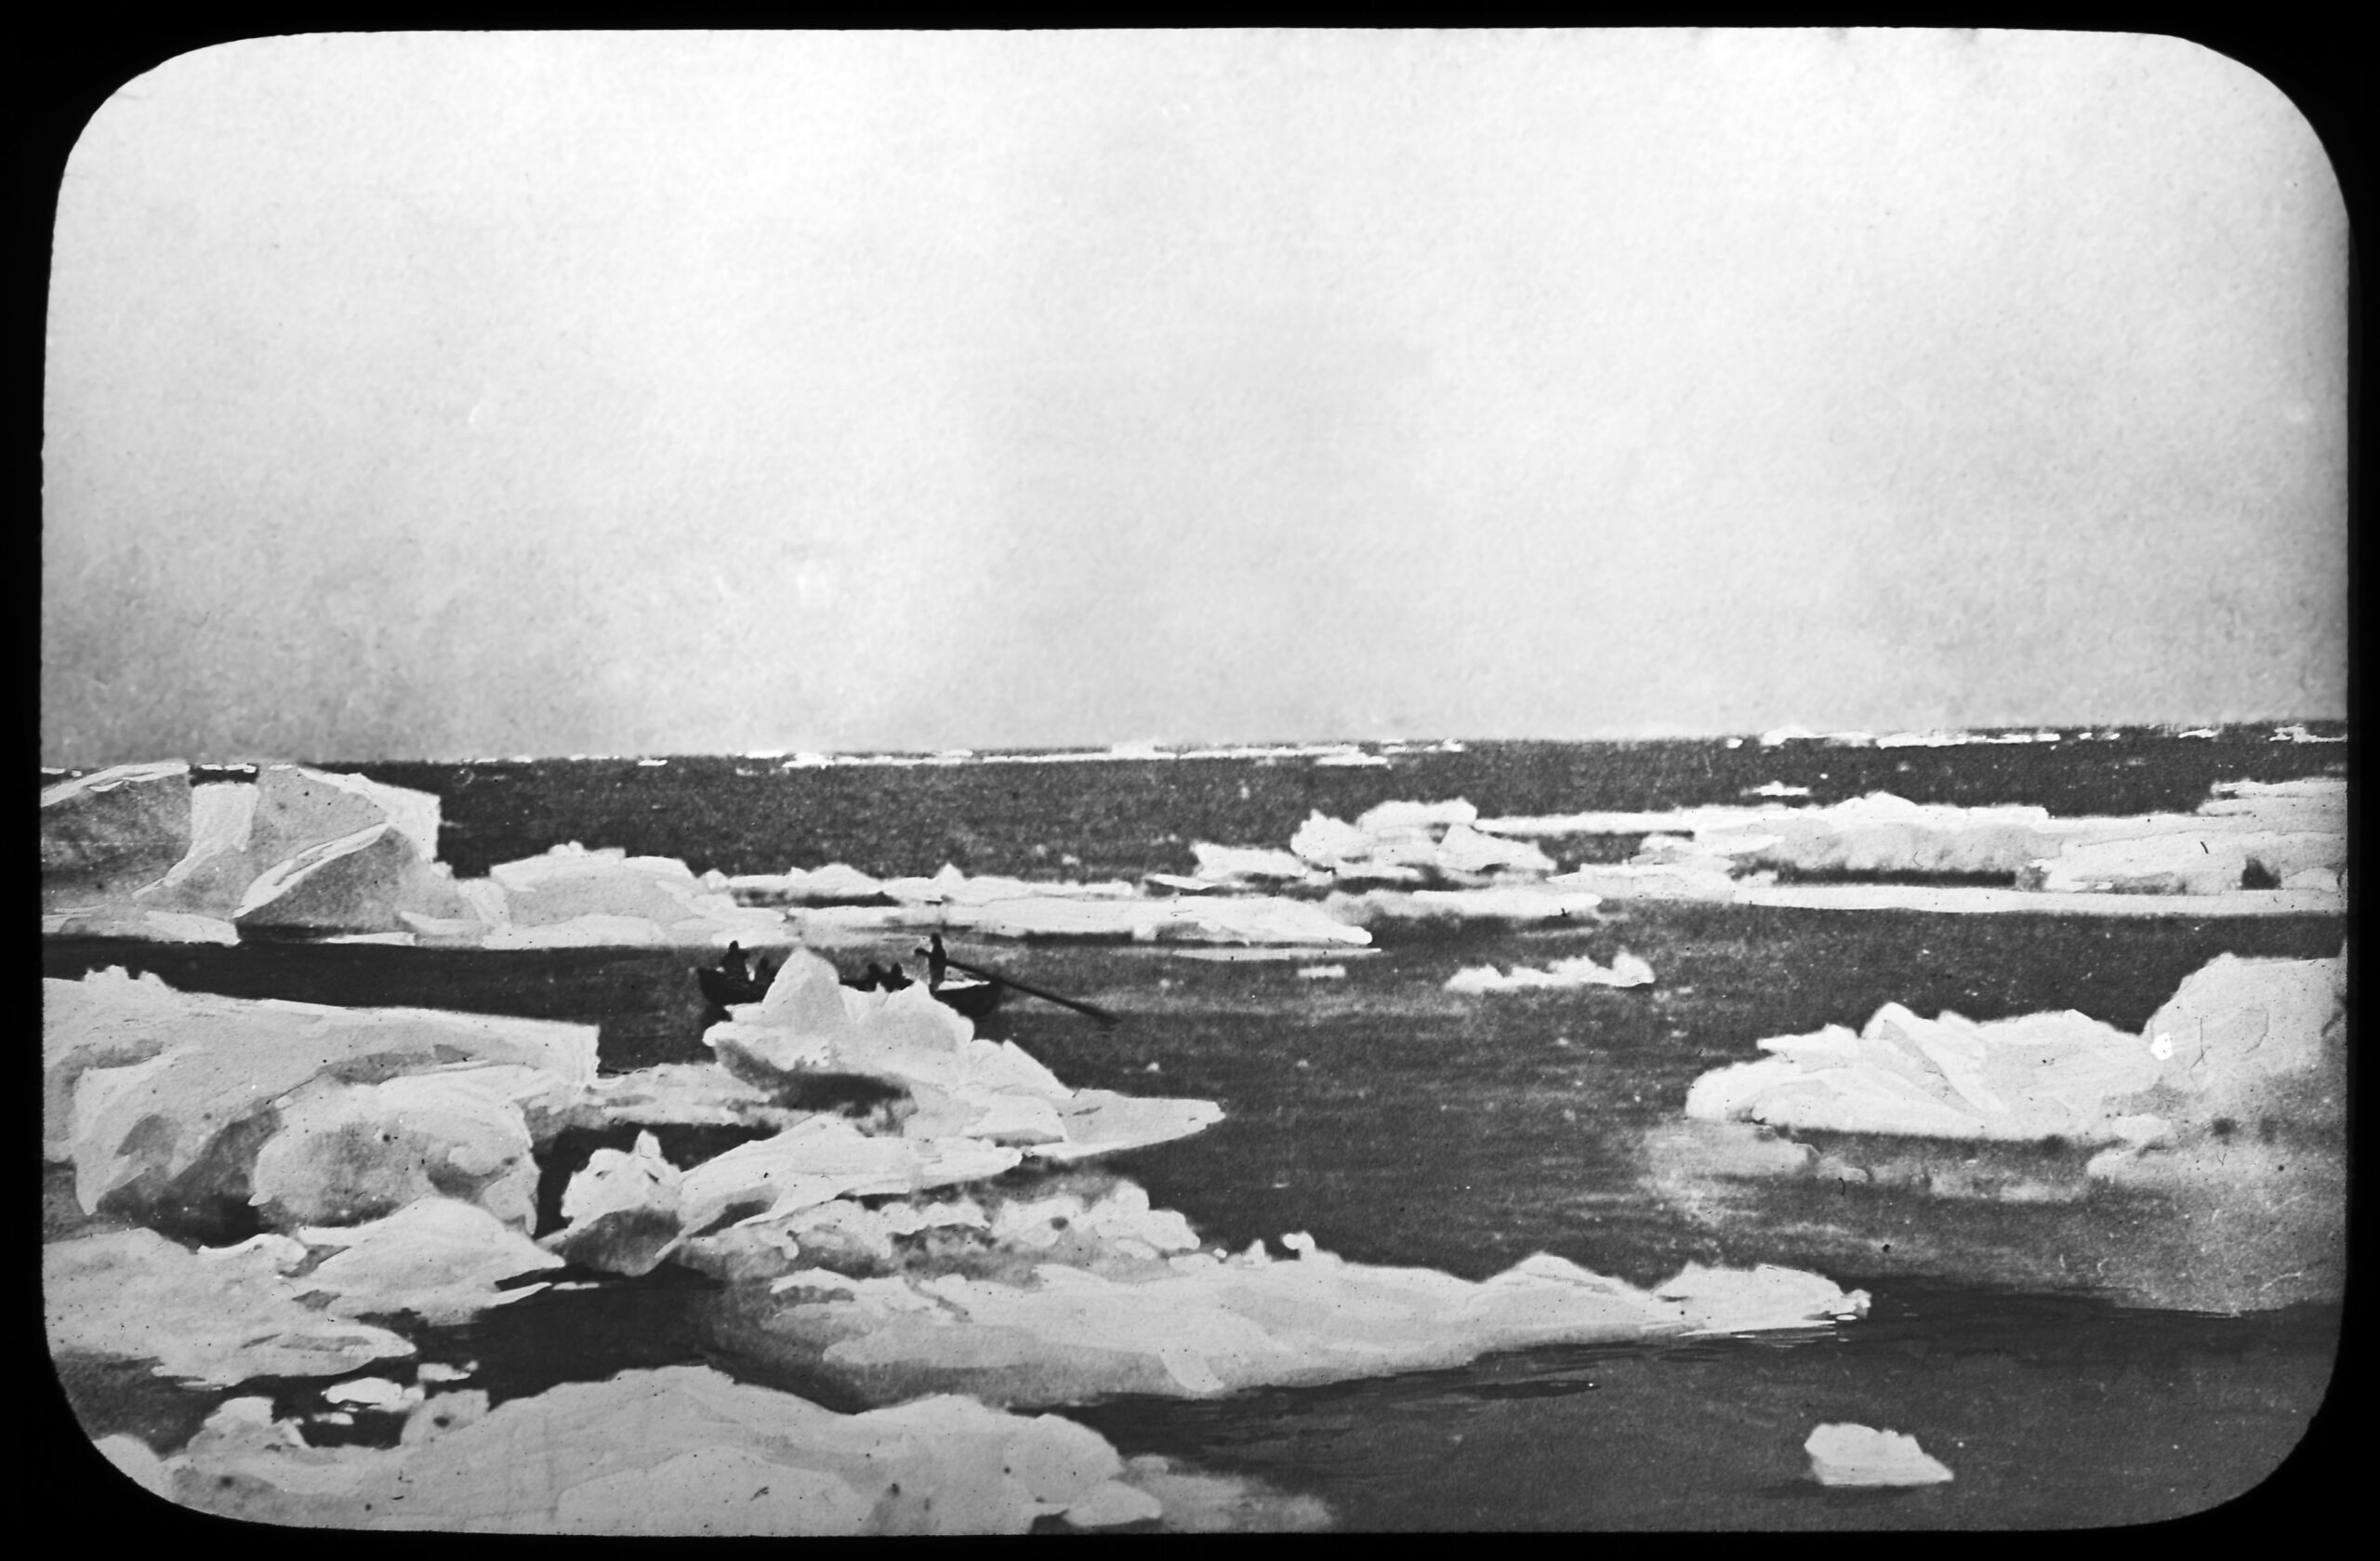 Black and white archive photo showing ice floating on water. It's Antarctica.